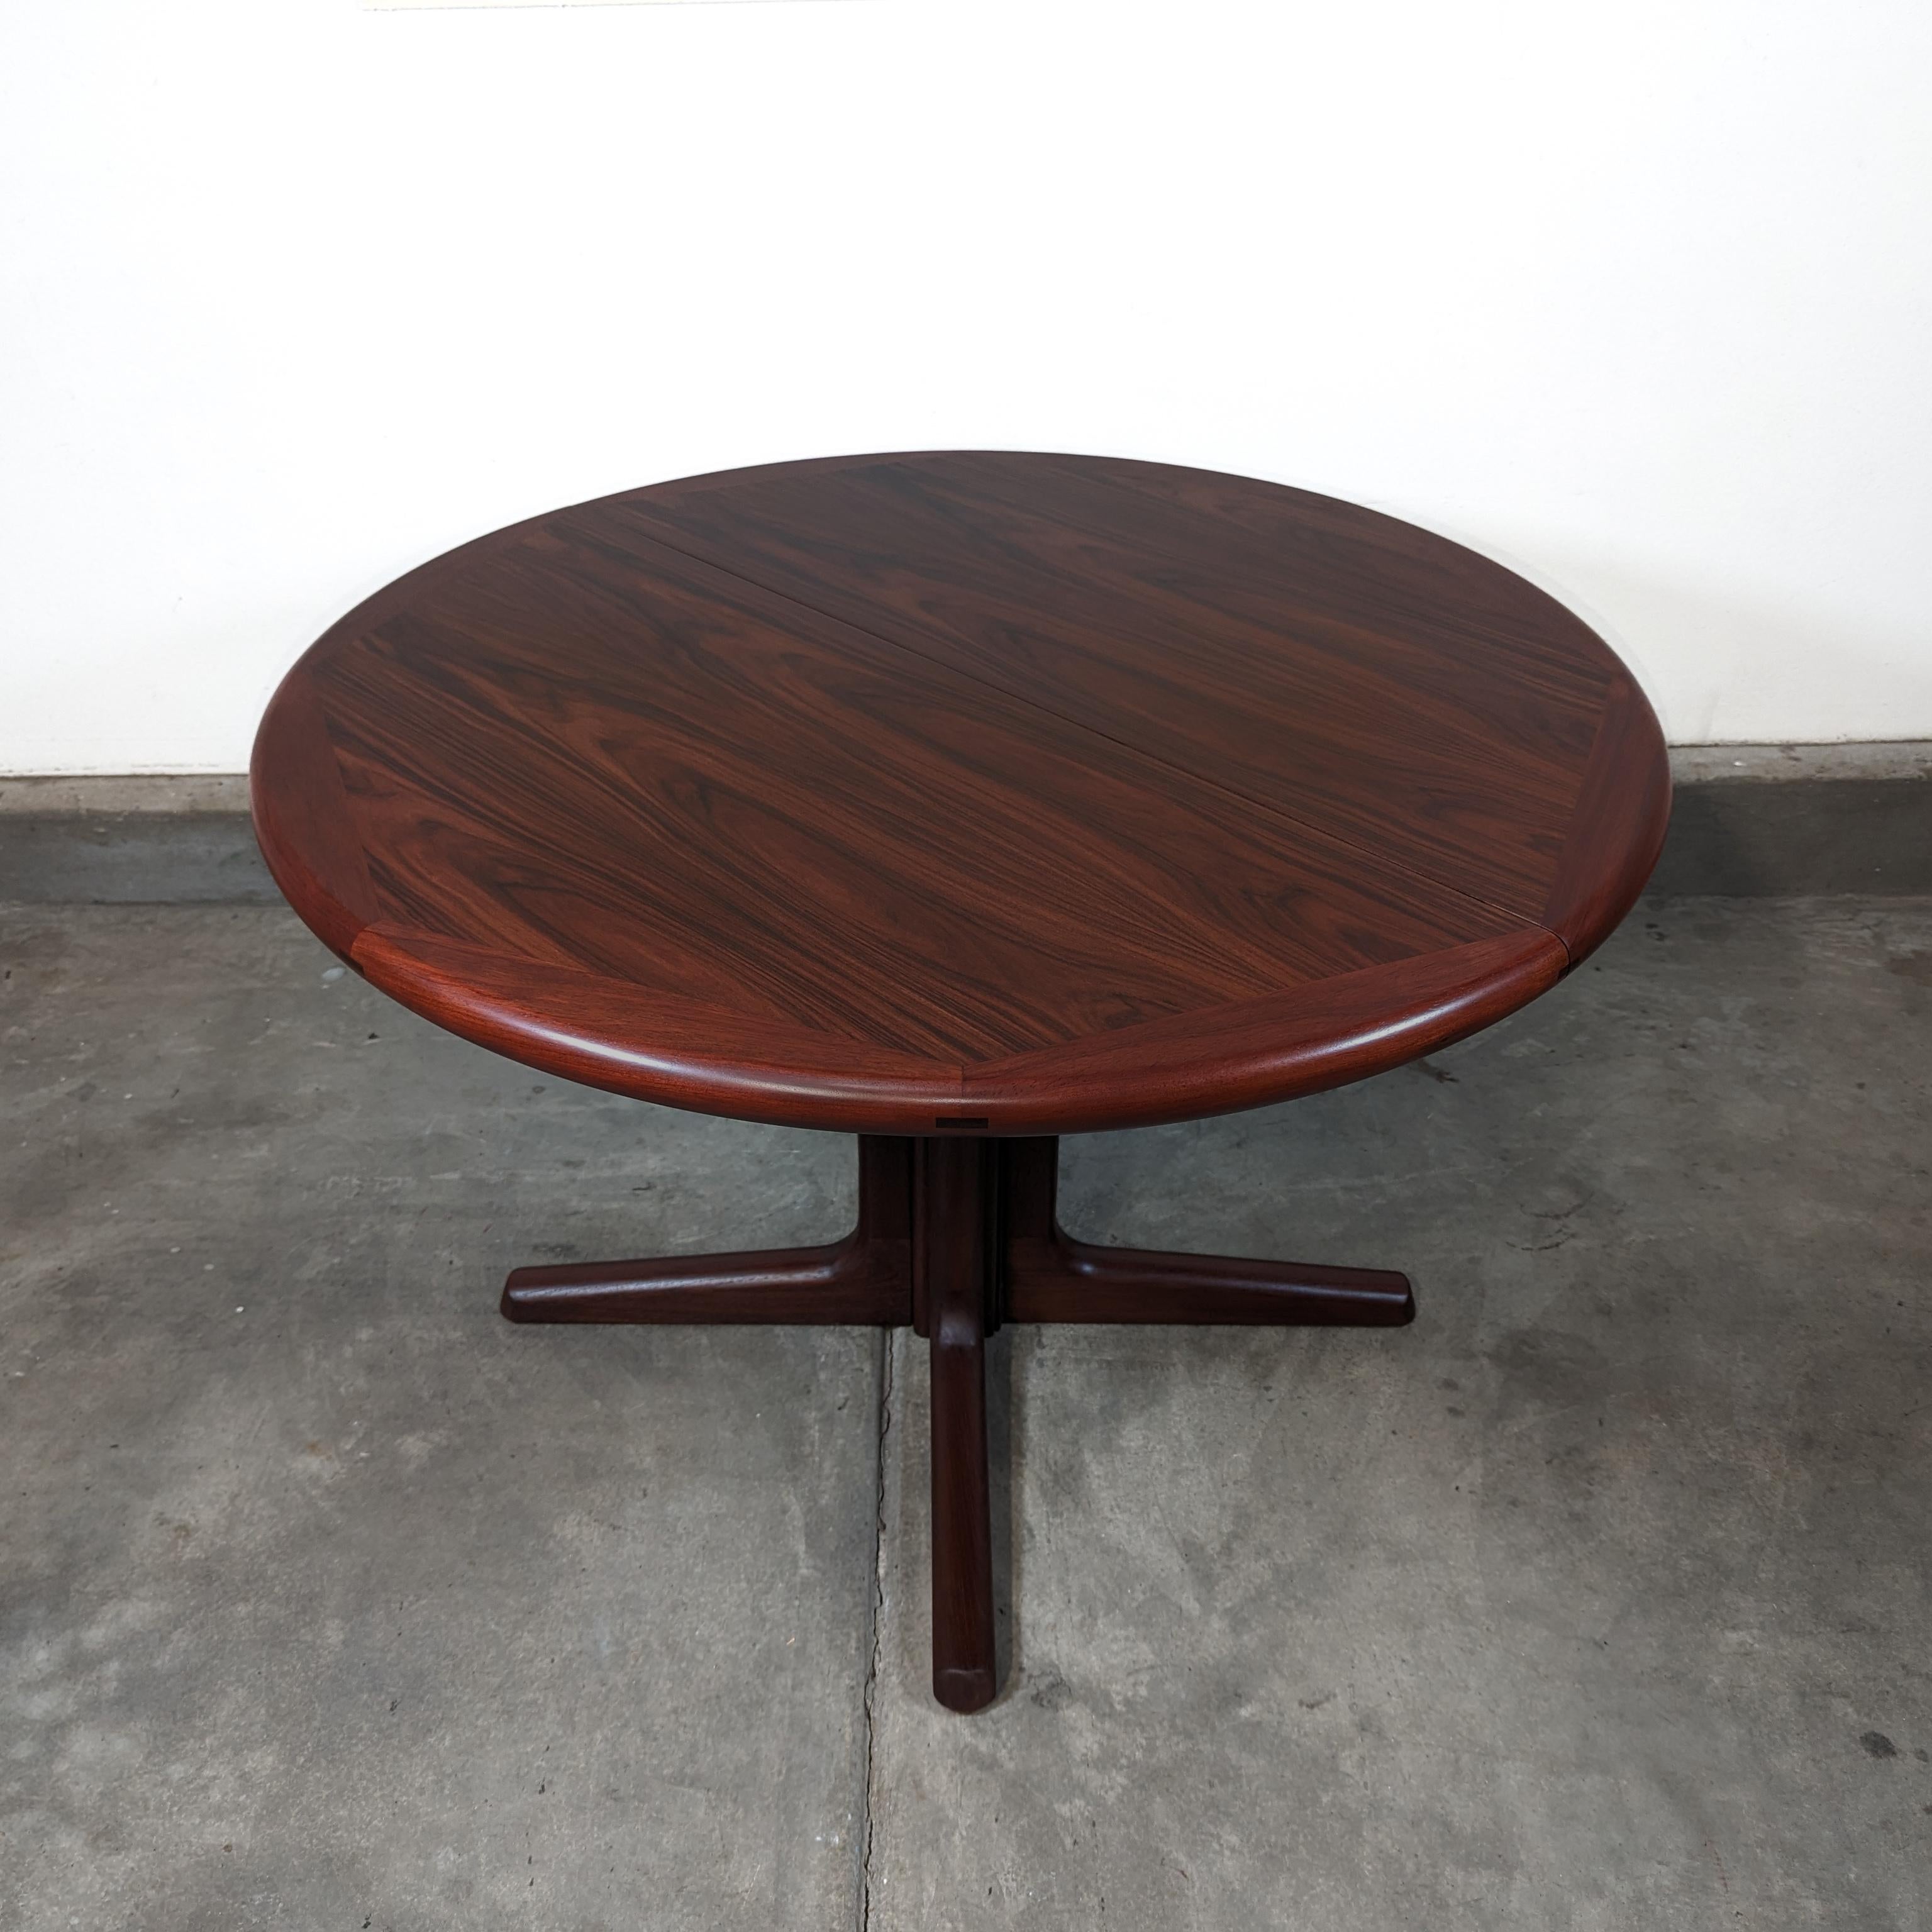 Transform your dining area with the exquisite vintage mid century modern rosewood pedestal dining table by Dyrlund from Denmark, dating back to the 1960s. This meticulously restored piece exudes timeless elegance and sophistication, showcasing the